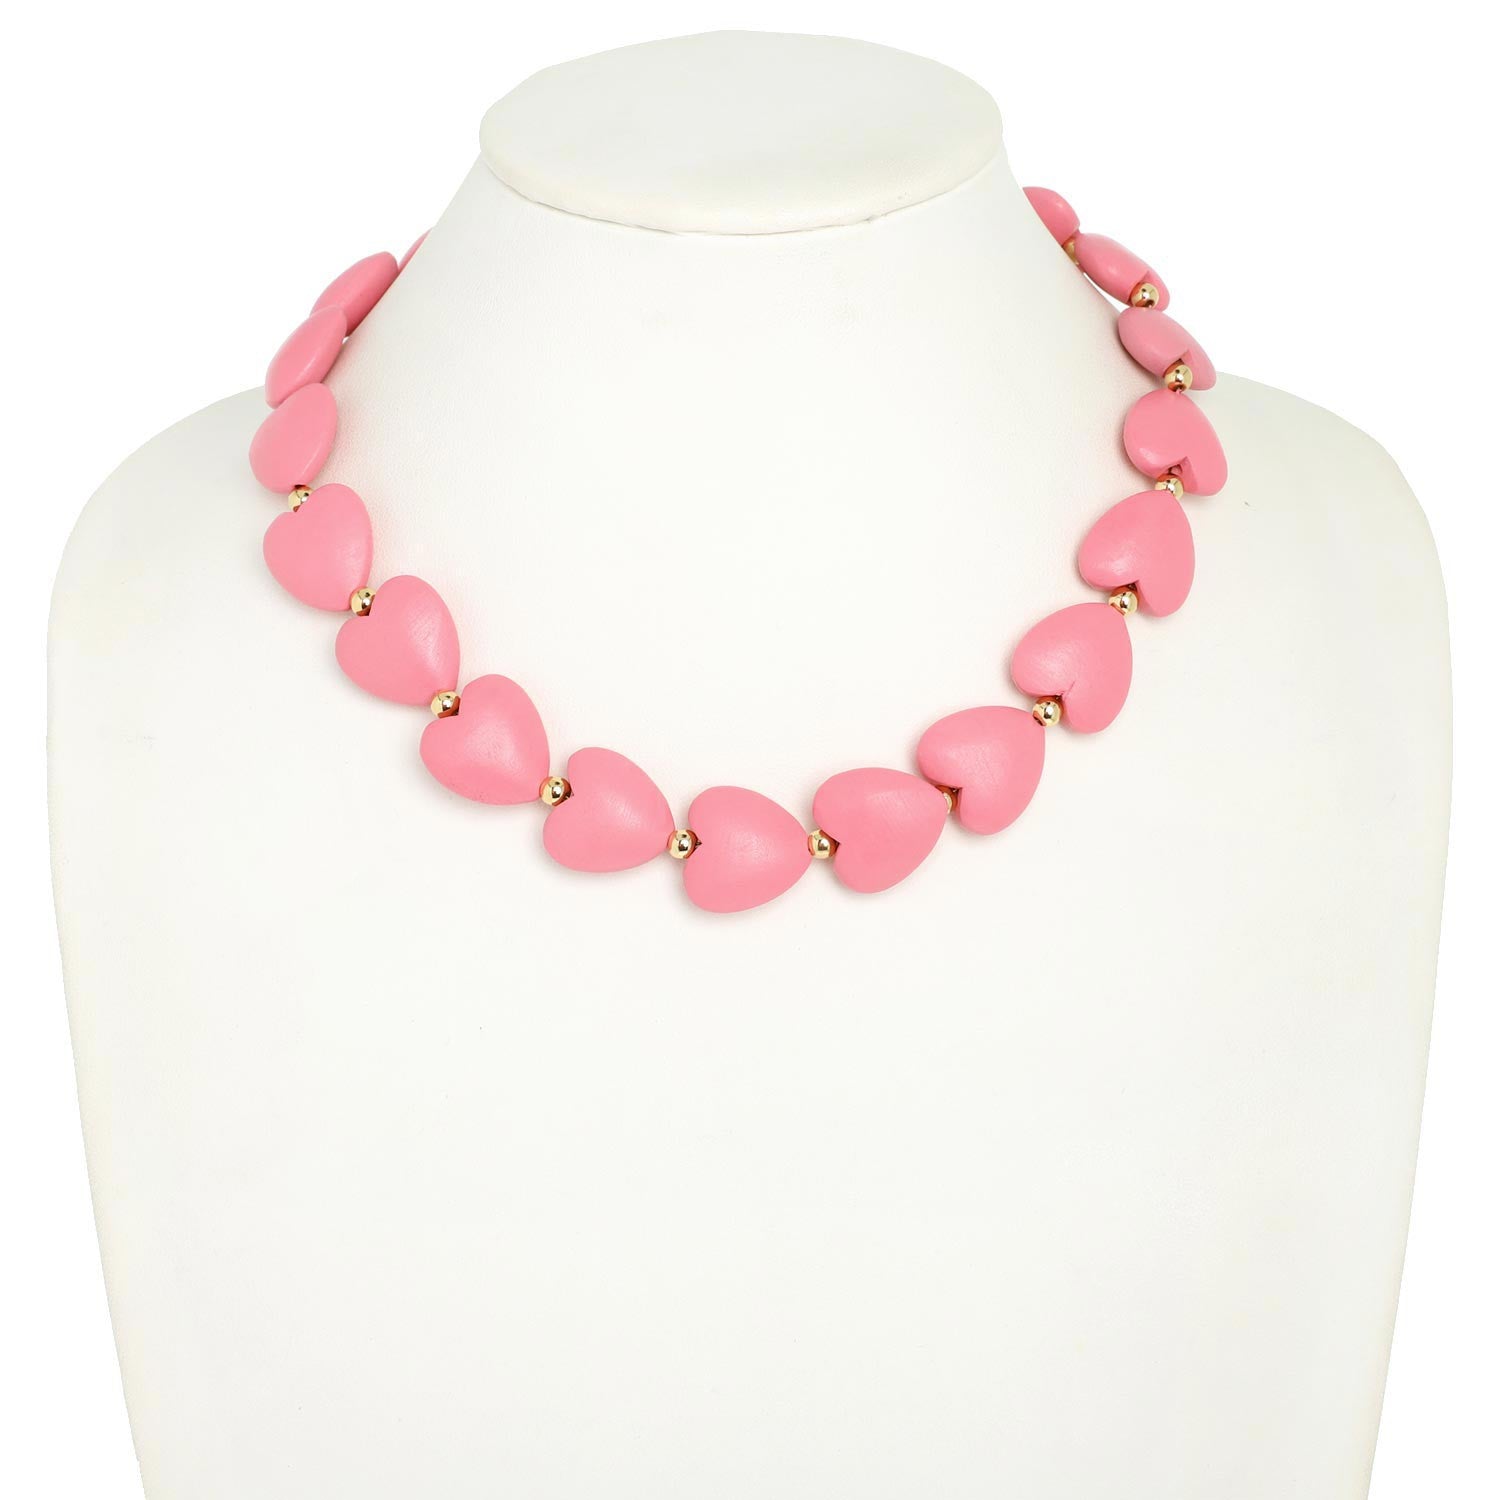 HEART SHAPED BEAD NECKLACE - N13742